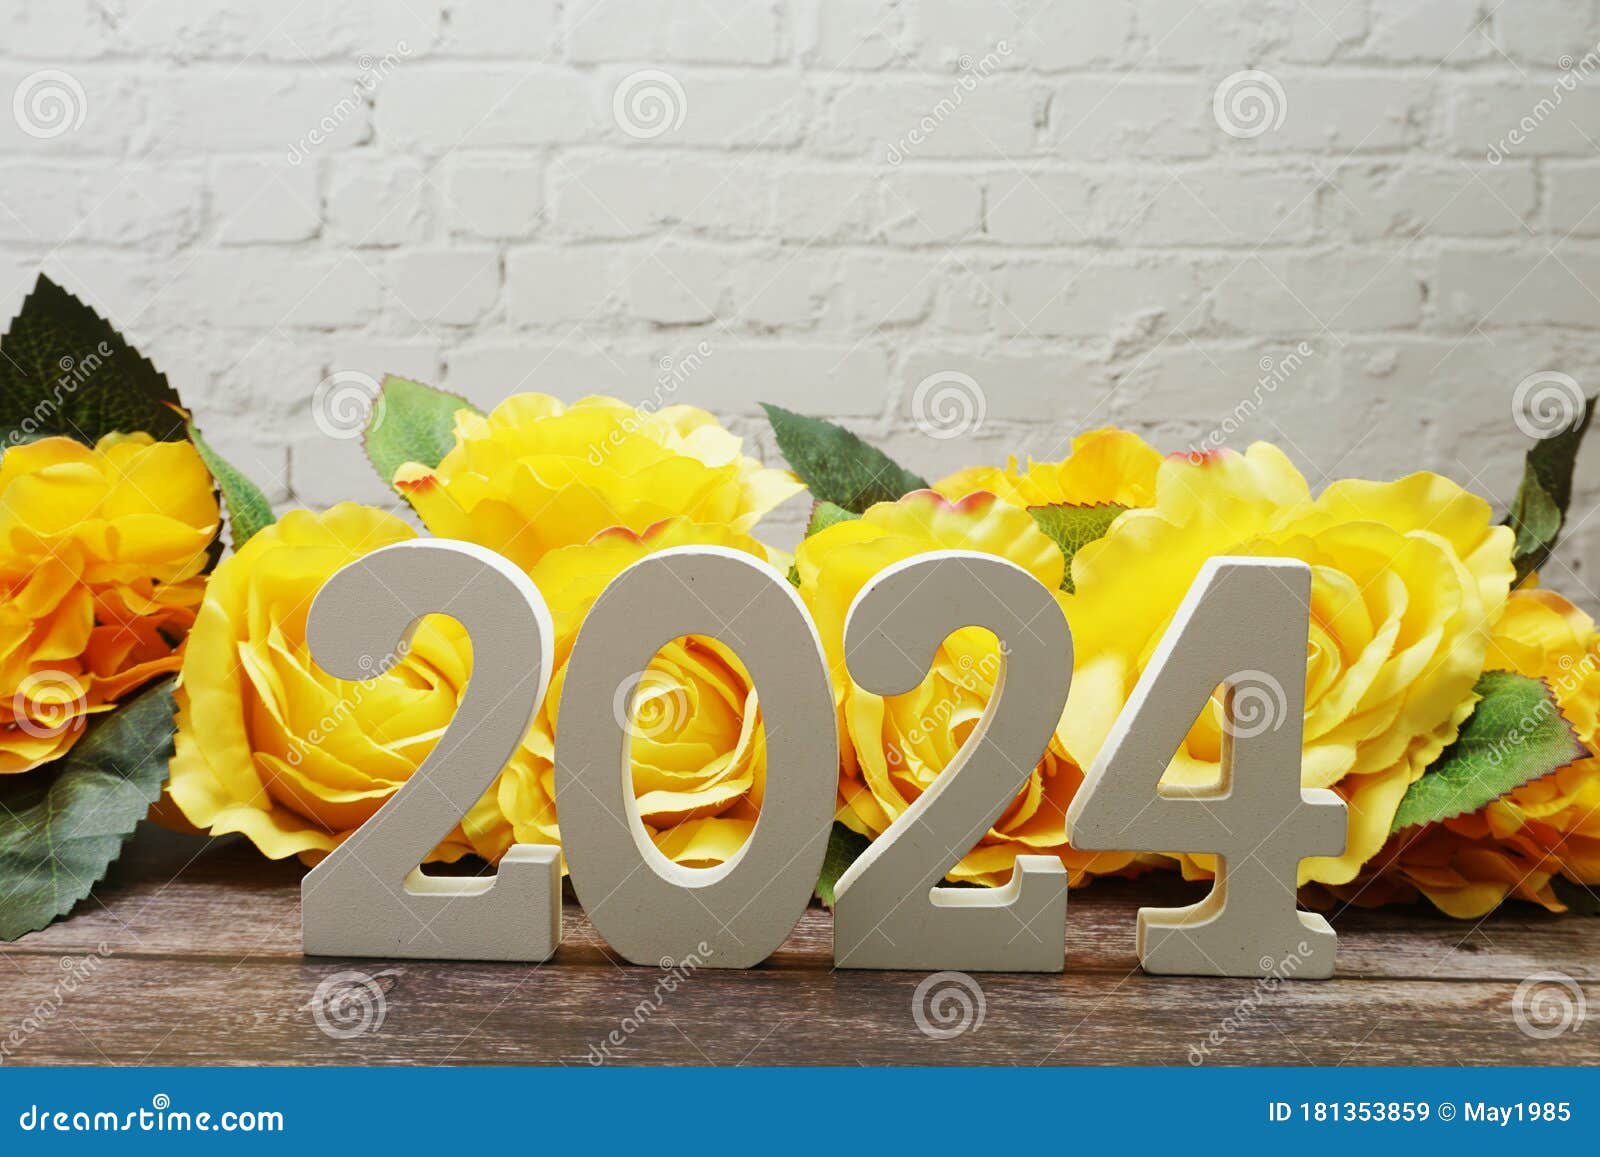 Happy New Year Roses Flower Decoration Space Copy White Brick Wall 181353859 